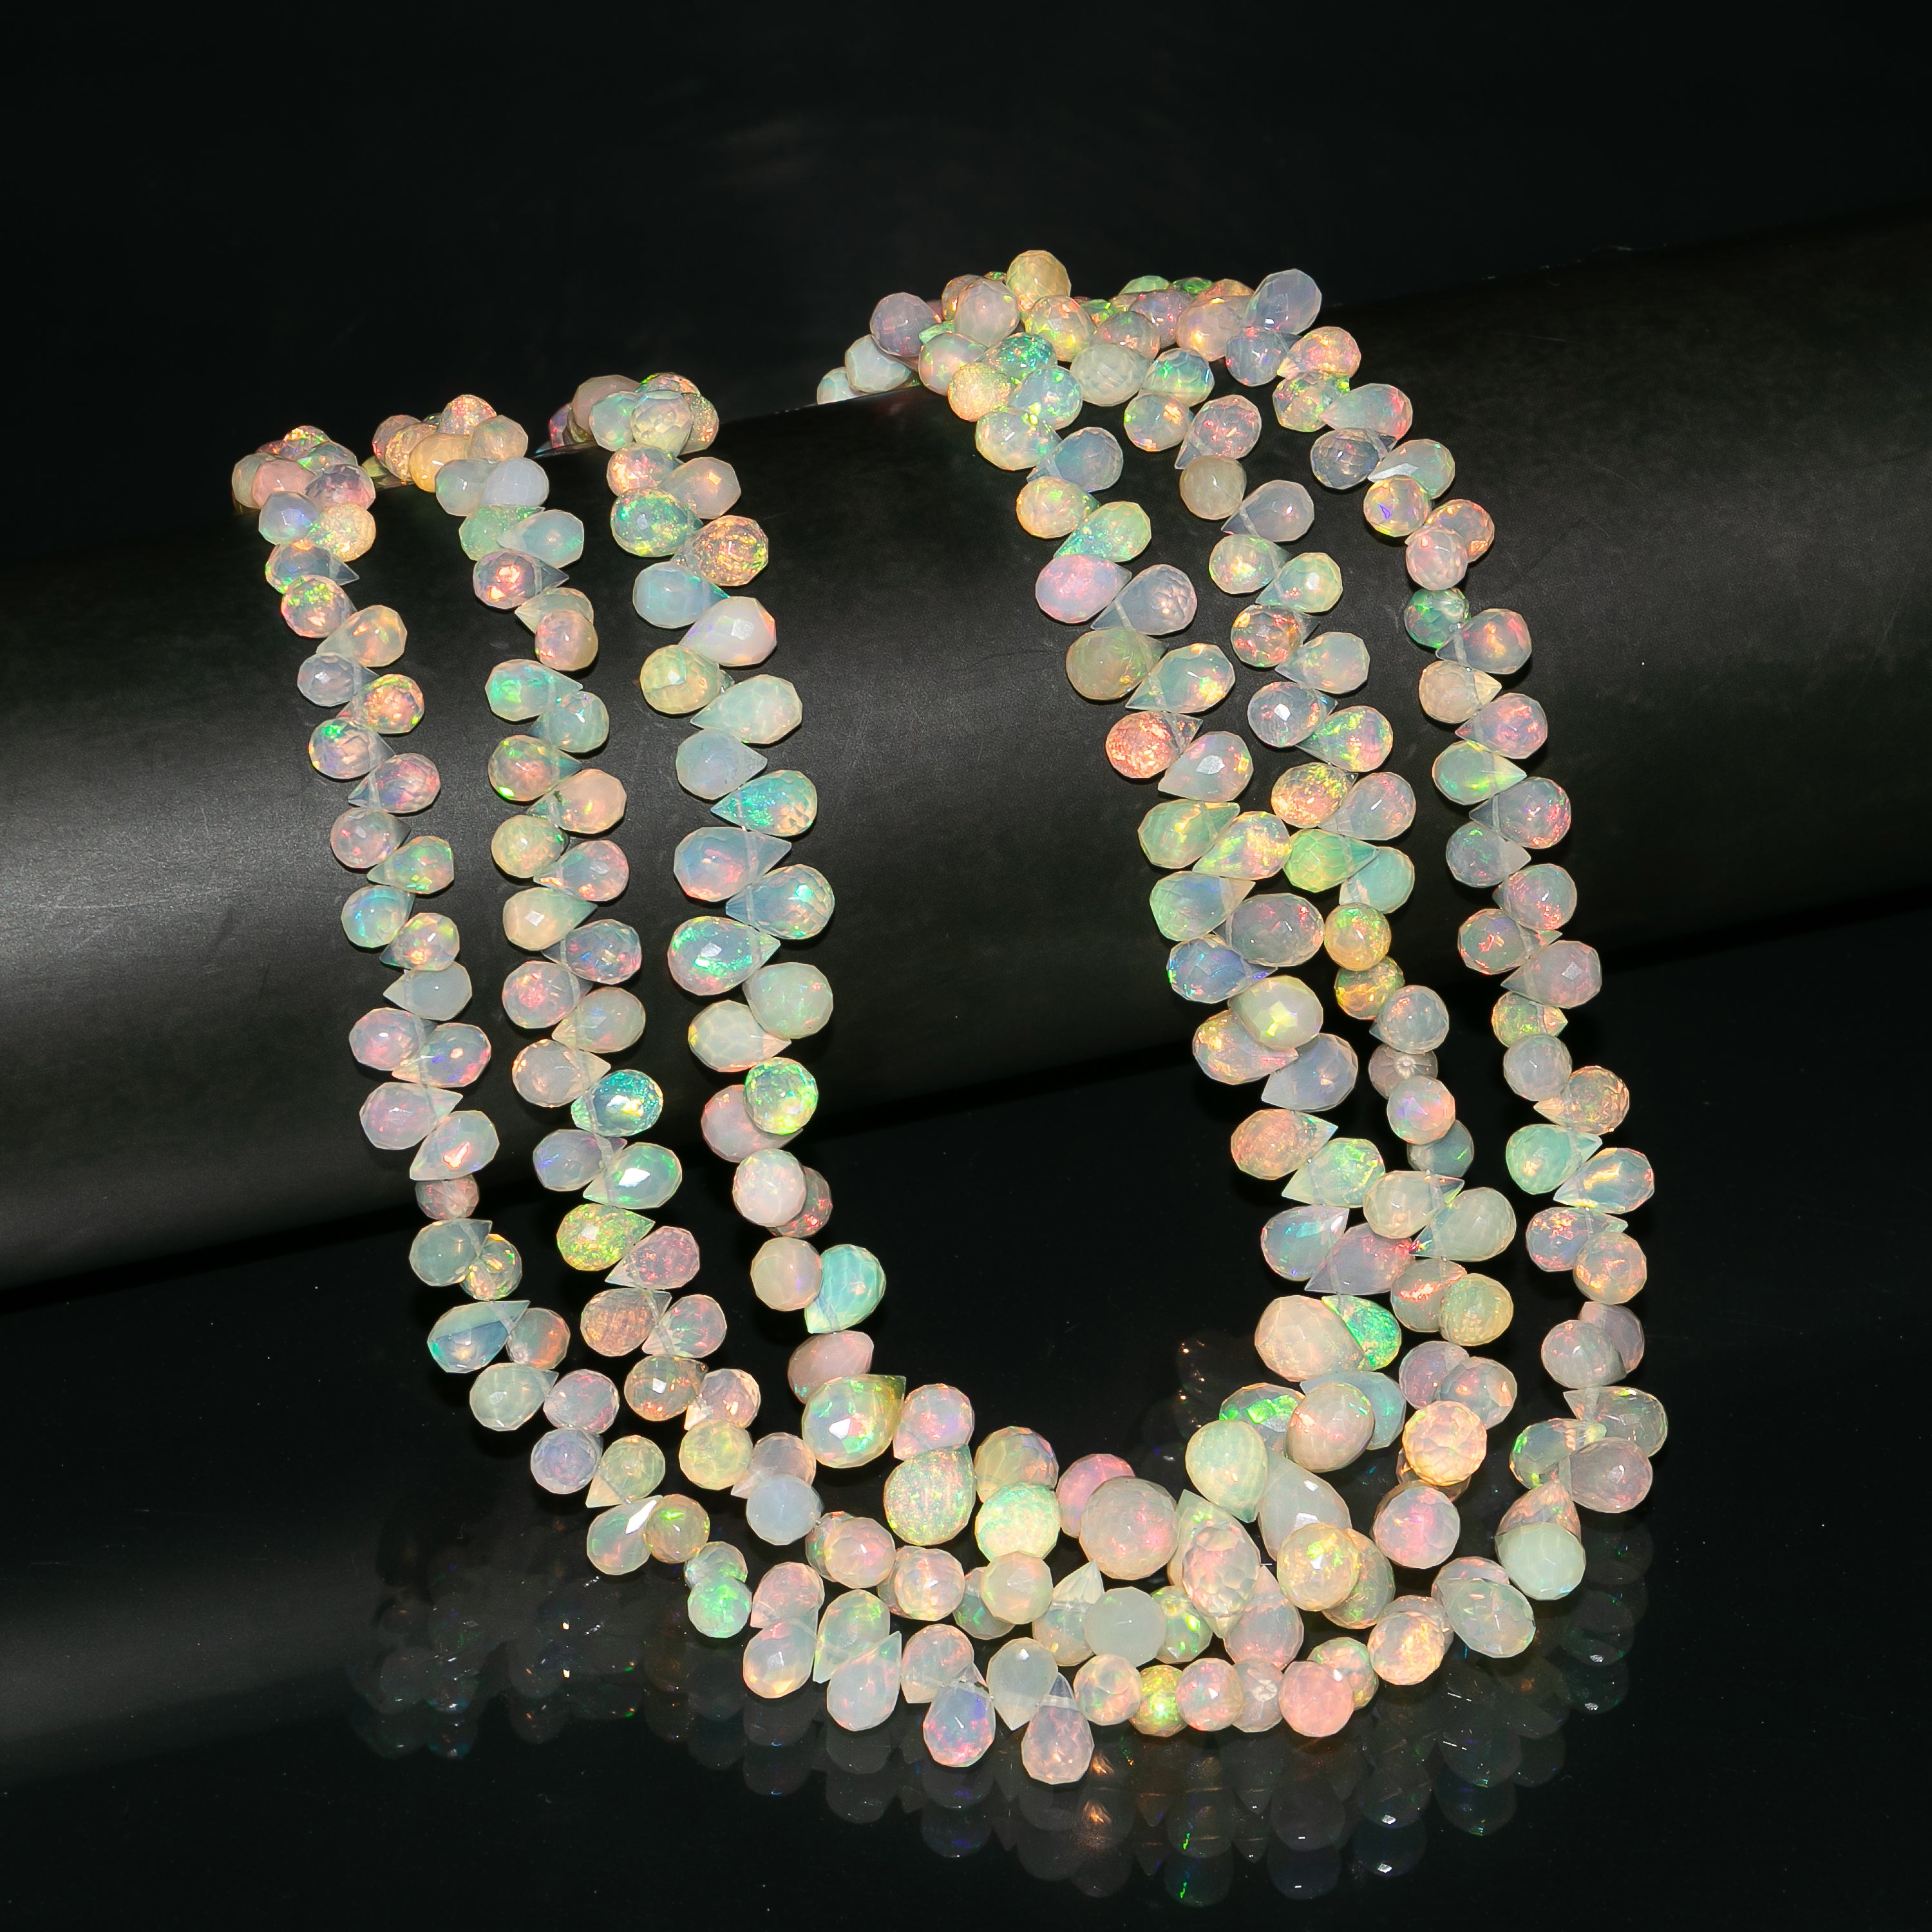 Top Quality Natural Ethiopian Opal Beads, Faceted Teardrop Beads, Loose Opal Beads